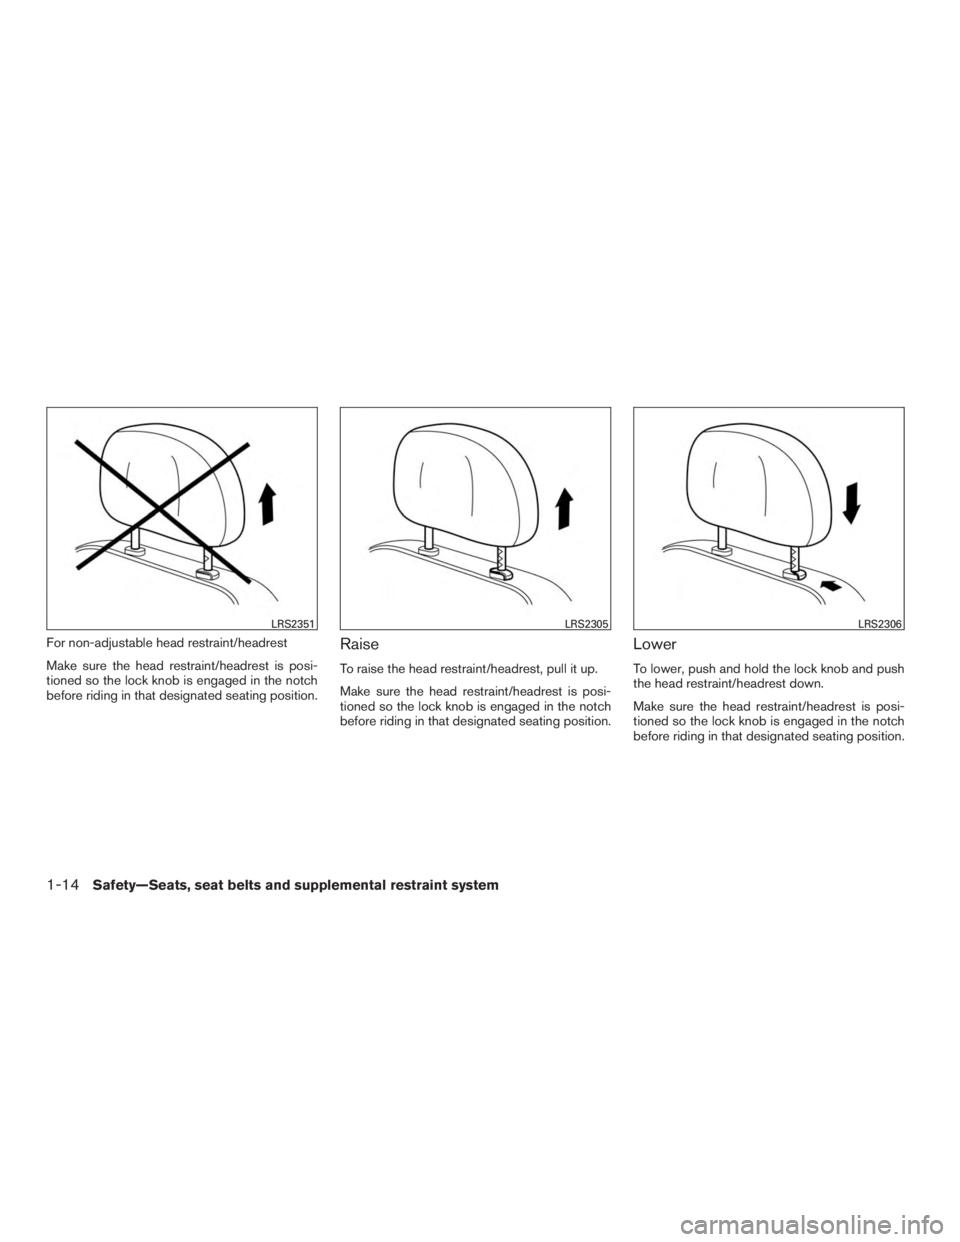 NISSAN ROGUE 2015  Owner´s Manual For non-adjustable head restraint/headrest
Make sure the head restraint/headrest is posi-
tioned so the lock knob is engaged in the notch
before riding in that designated seating position.Raise
To rai